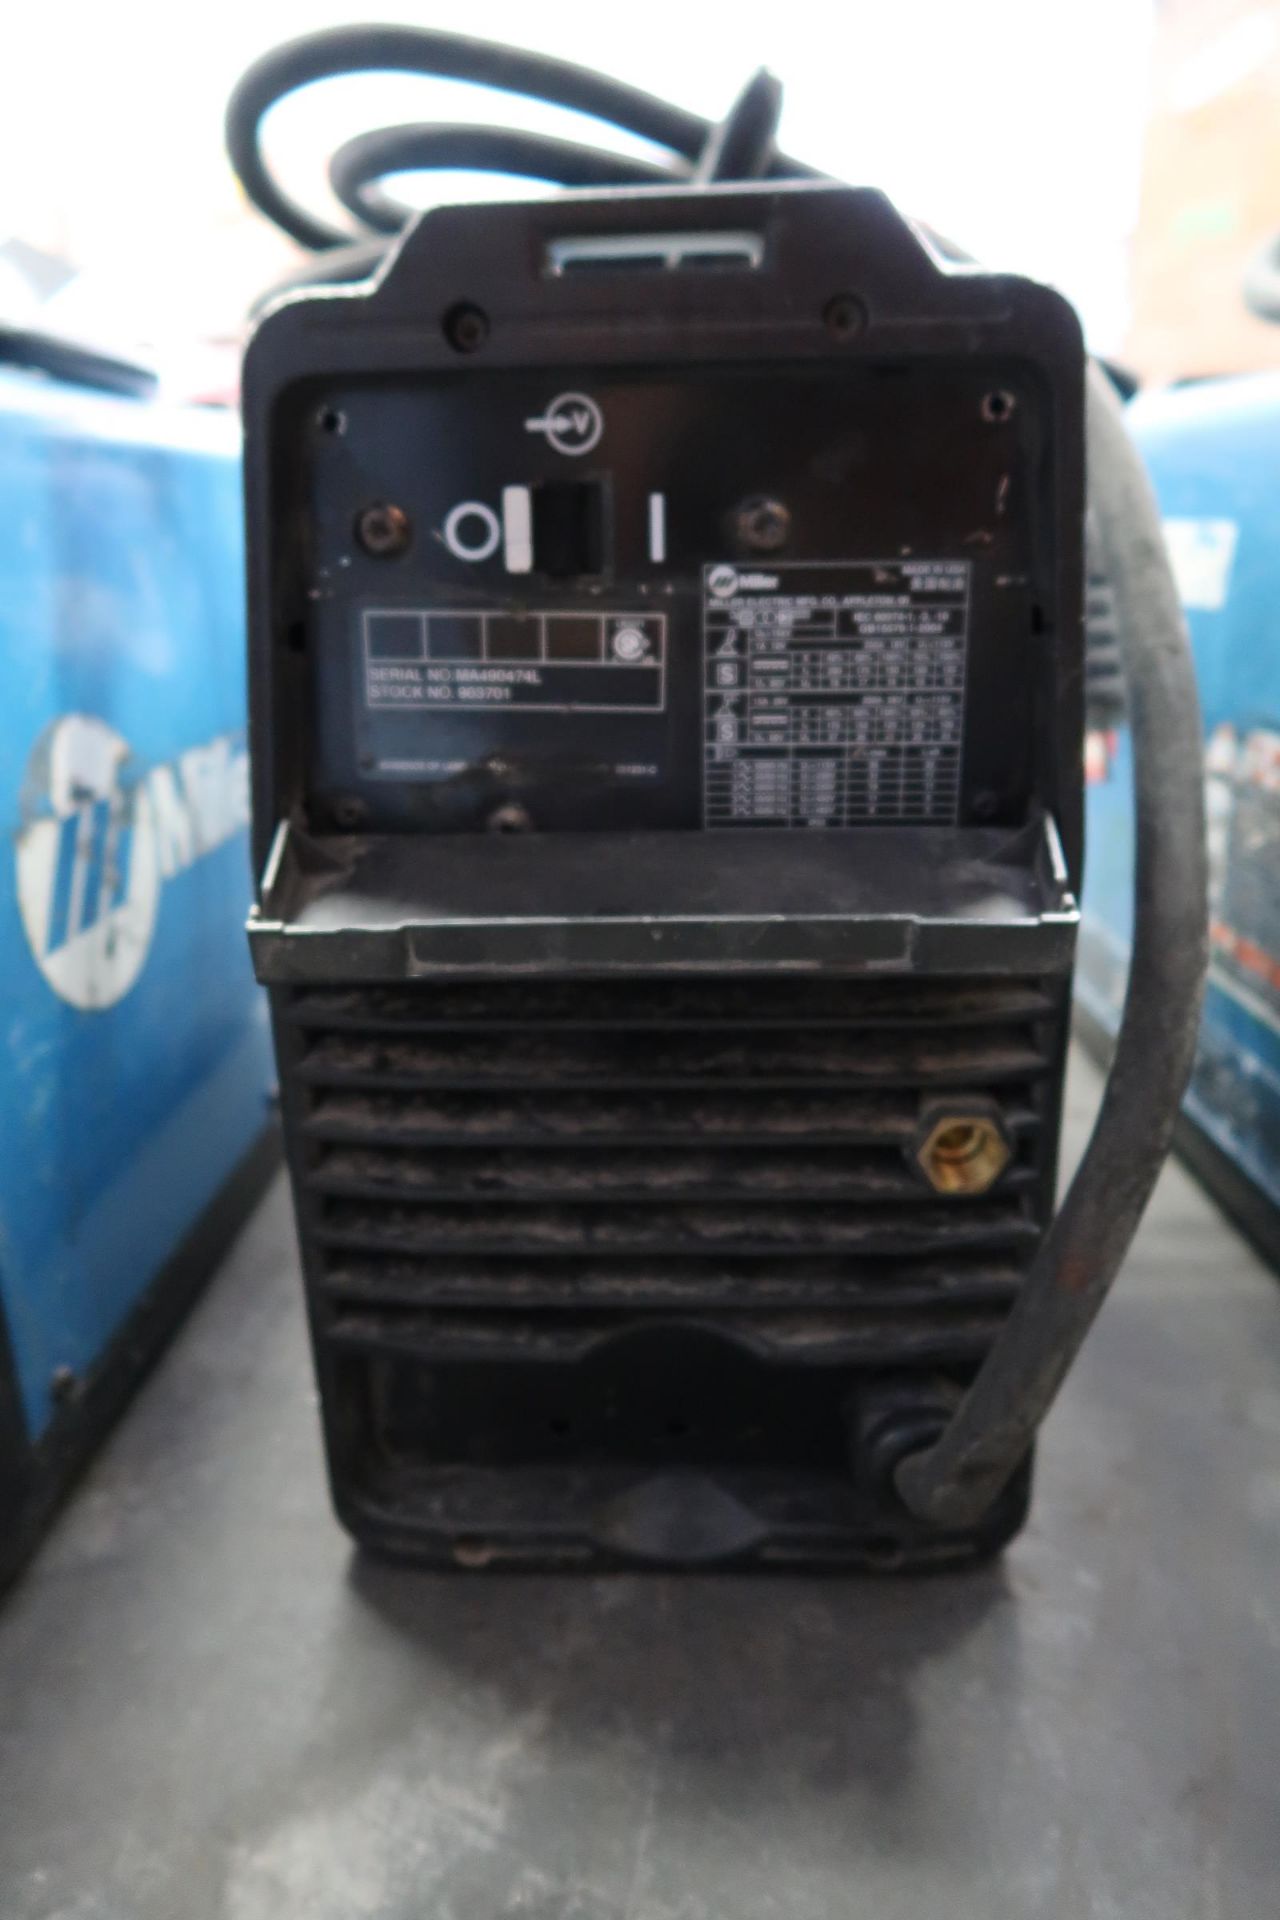 Miller CST280 Arc Welding Power Source s/n MA490474L (SOLD AS-IS - NO WARRANTY) - Image 3 of 5